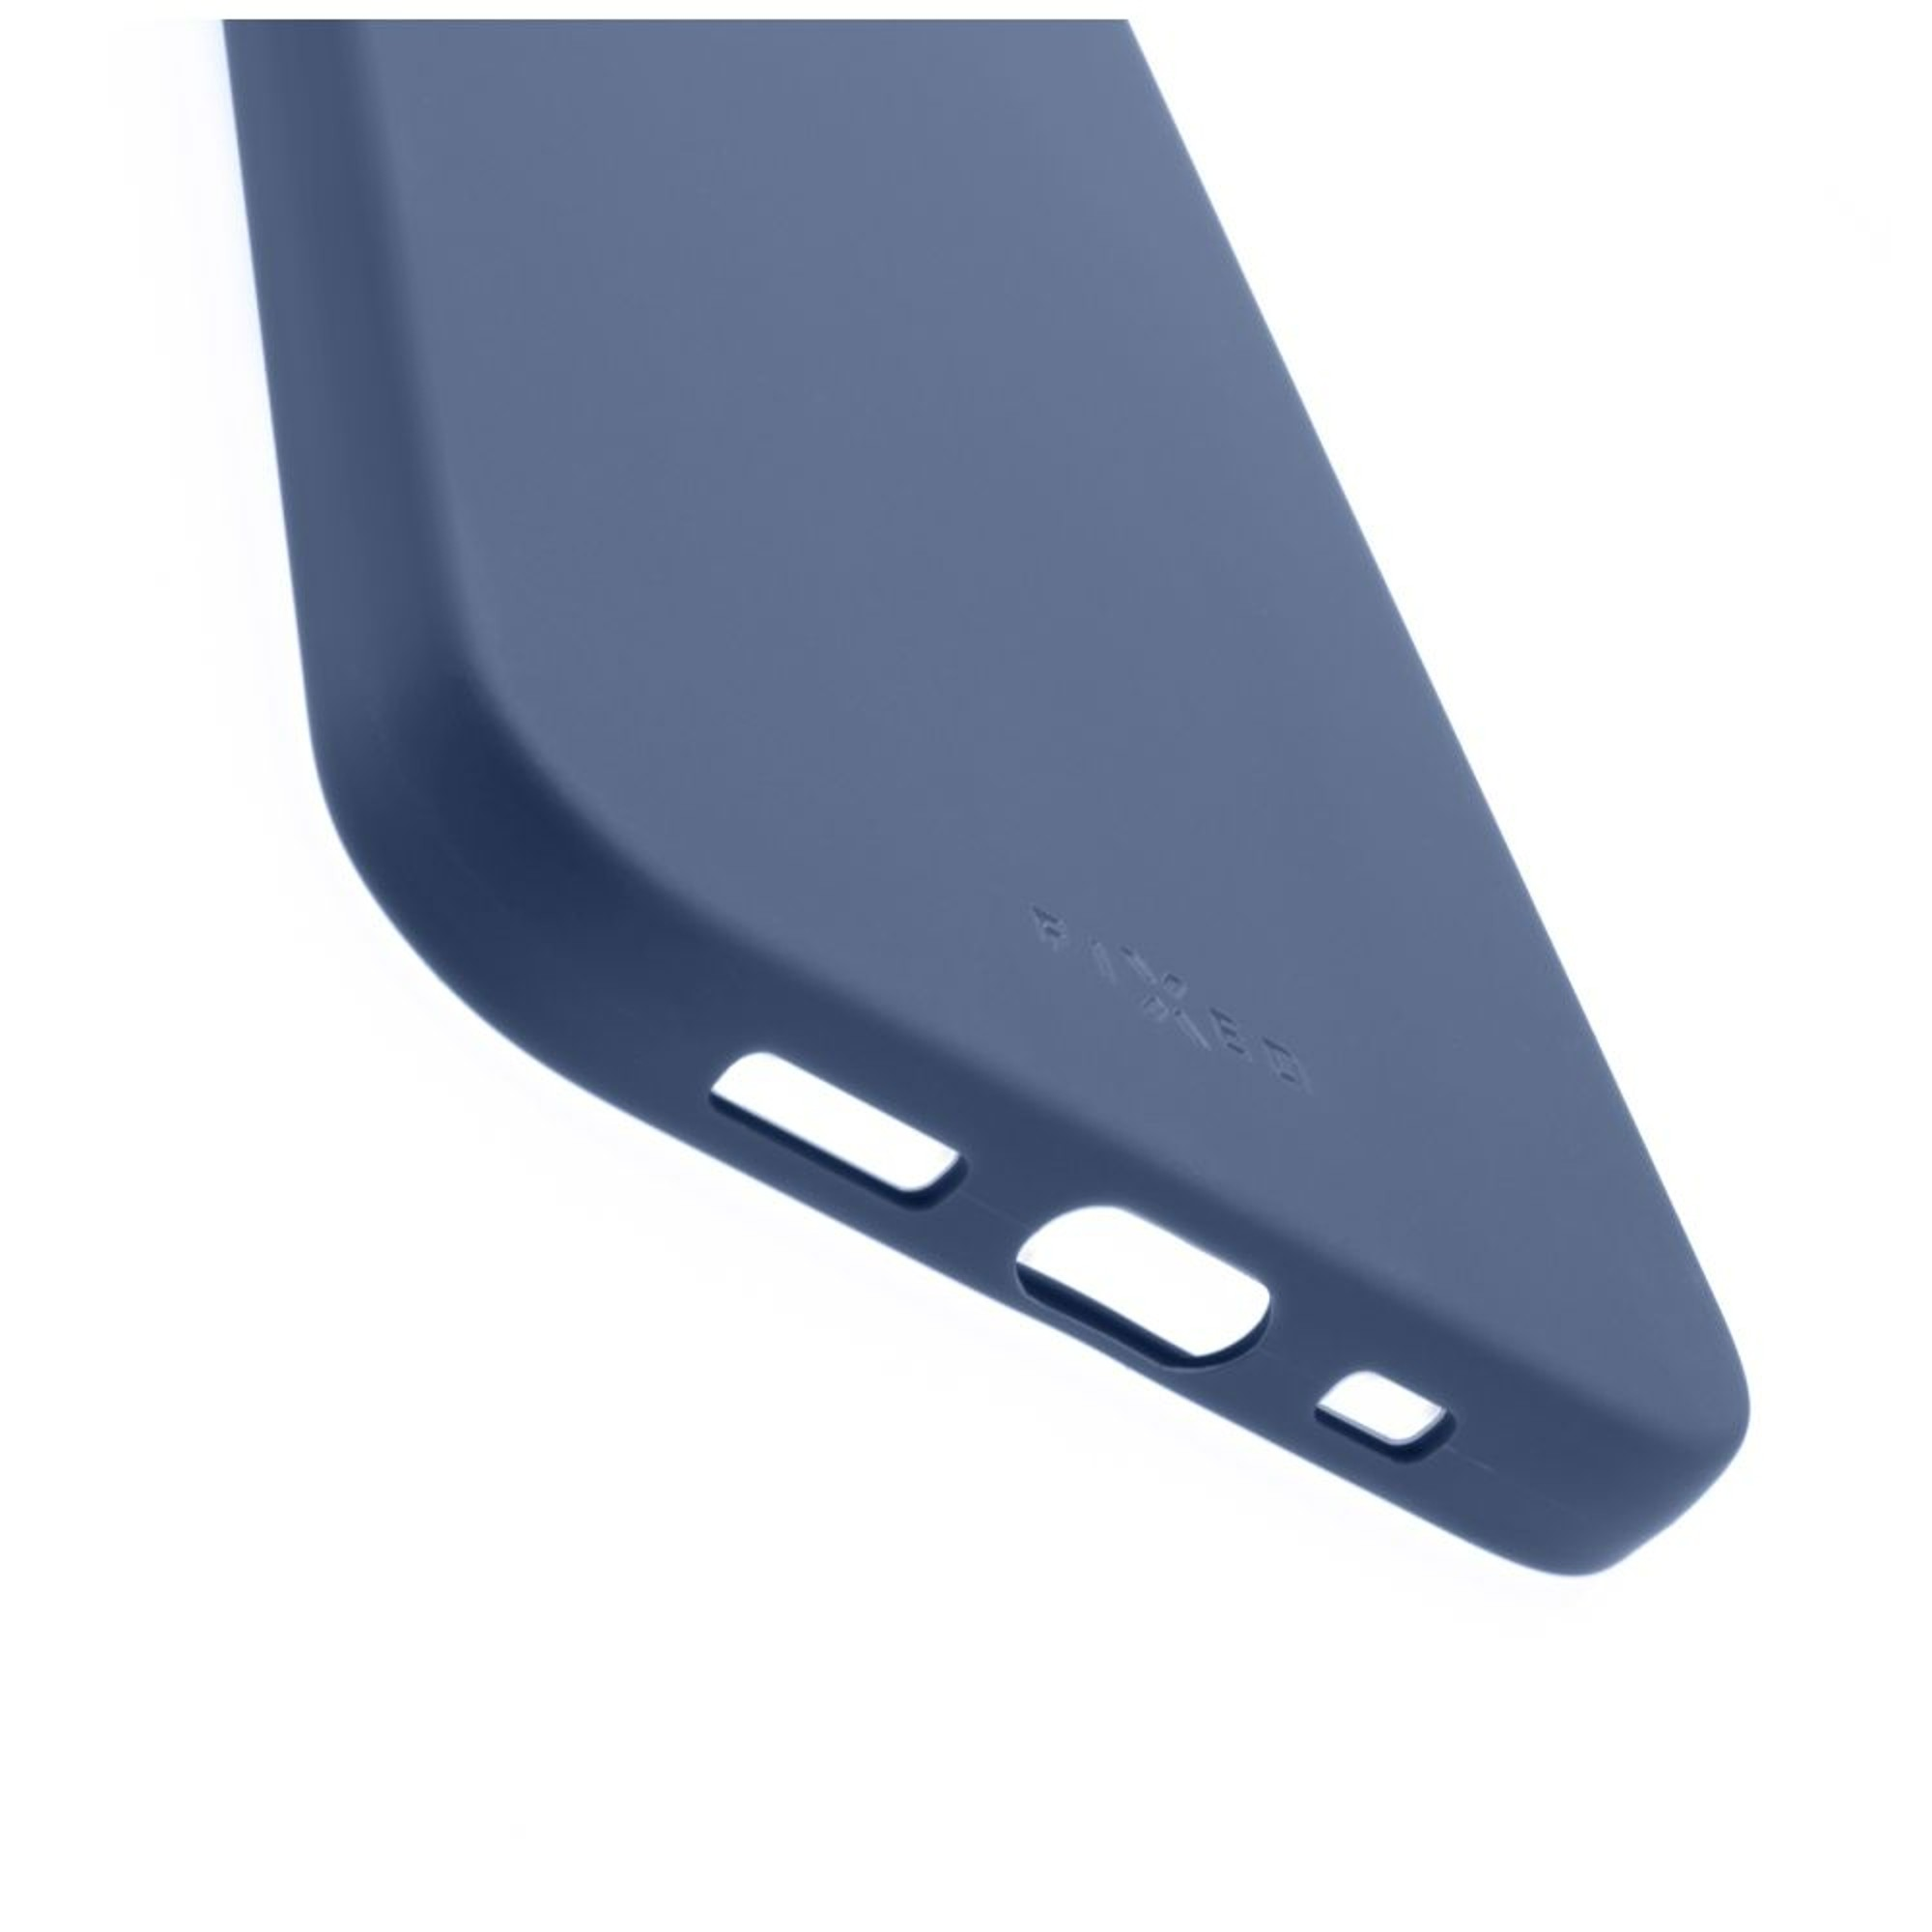 FIXED Story Blau 13 Lite, Soft-Touch Backcover, Xiaomi, FIXST-1097-BL